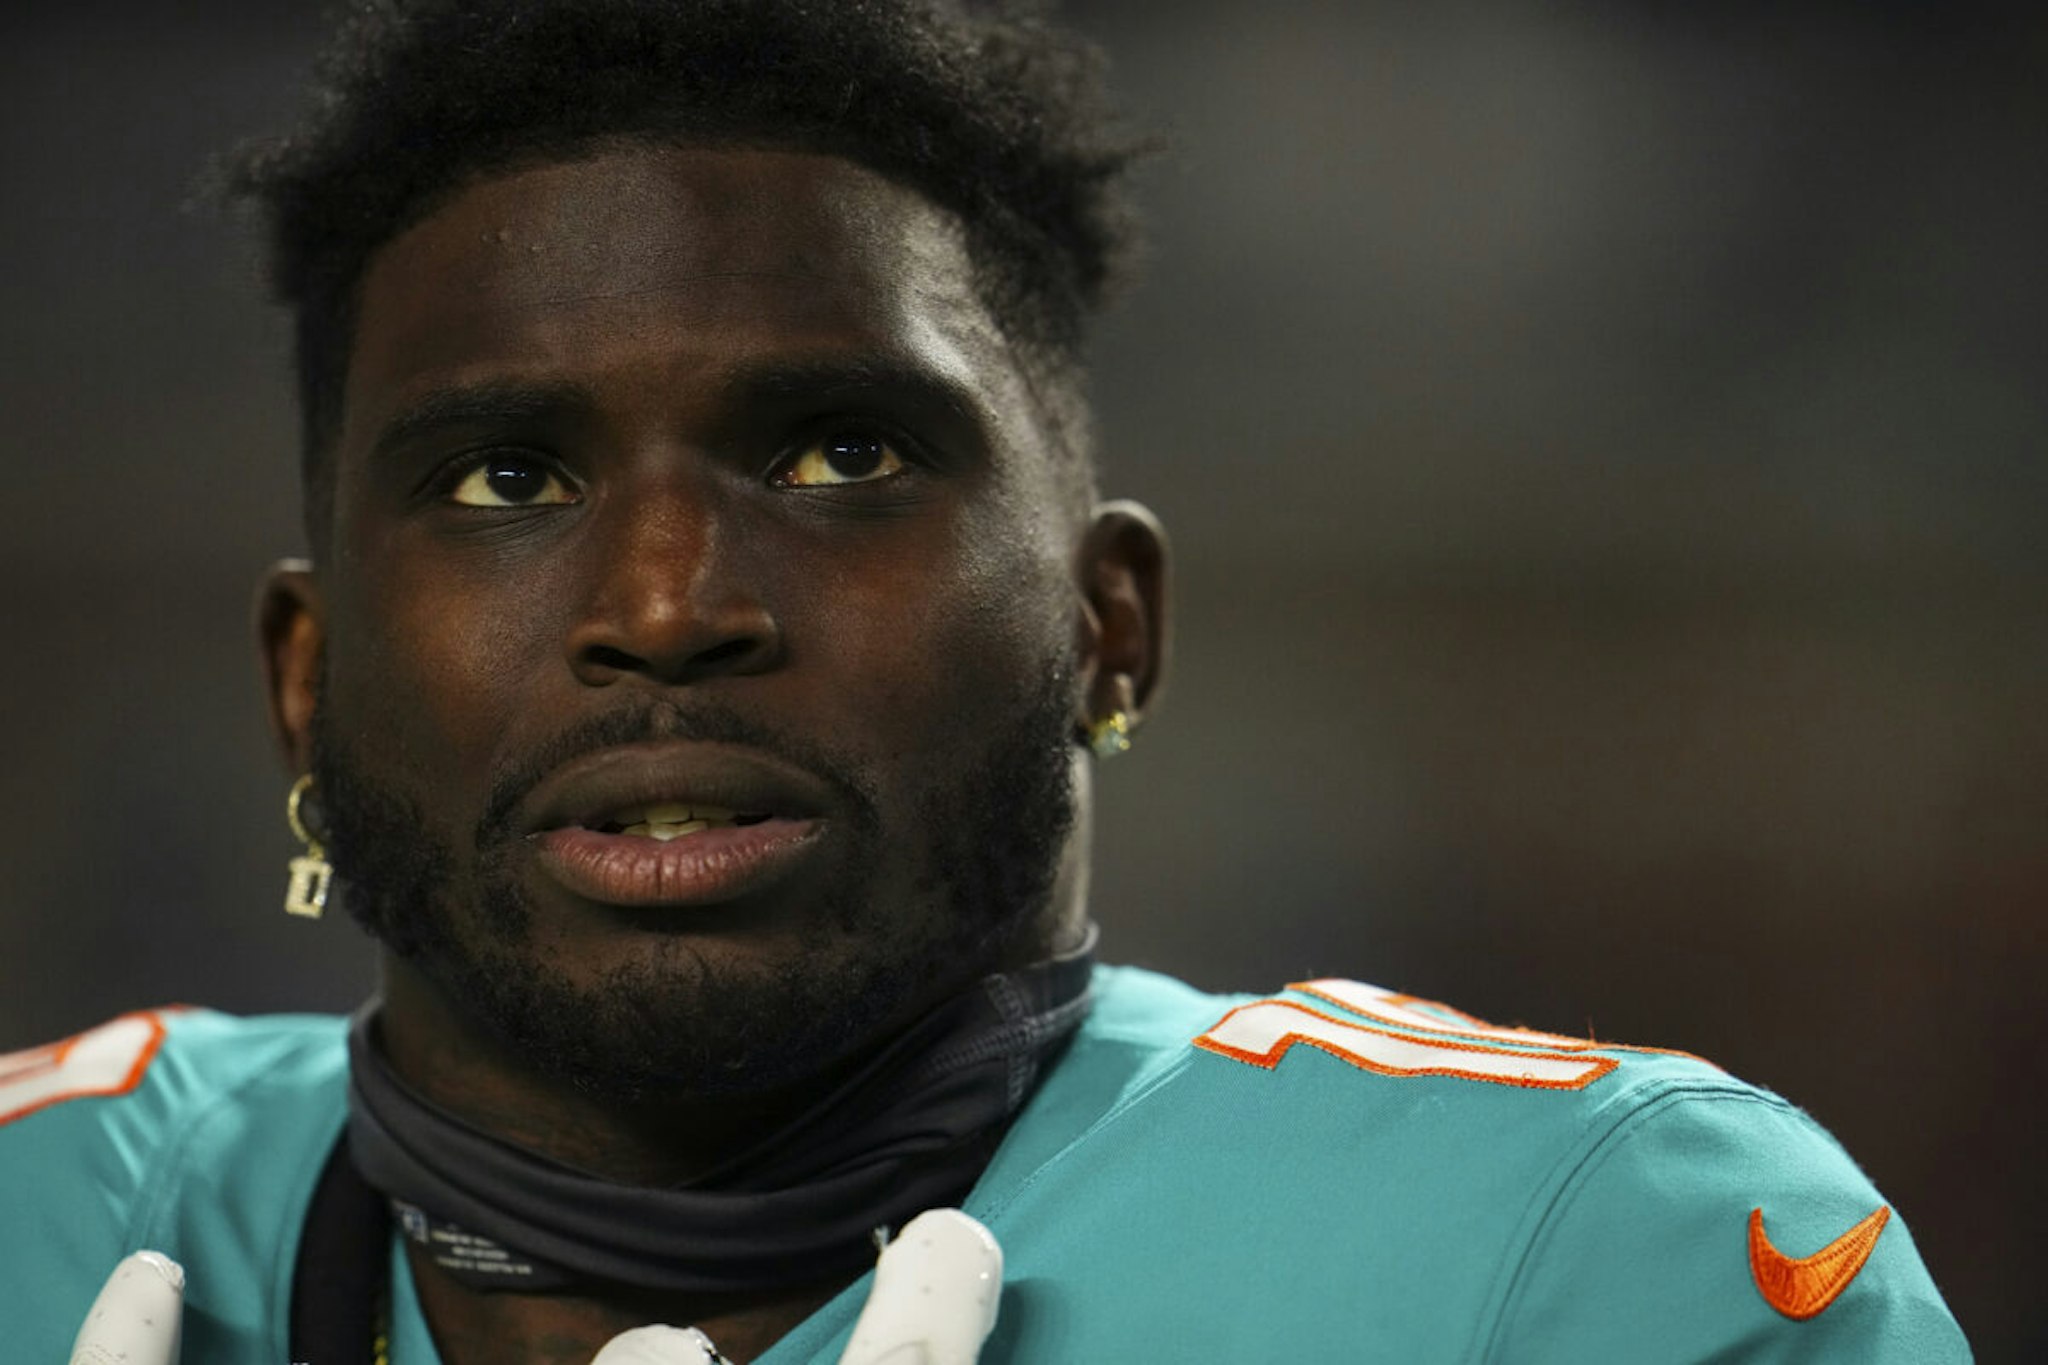 MIAMI GARDENS, FL - DECEMBER 11: Tyreek Hill #10 of the Miami Dolphins looks on from the sideline prior to an NFL football game against the Tennessee Titans at Hard Rock Stadium on December 11, 2023 in Miami Gardens, Florida.